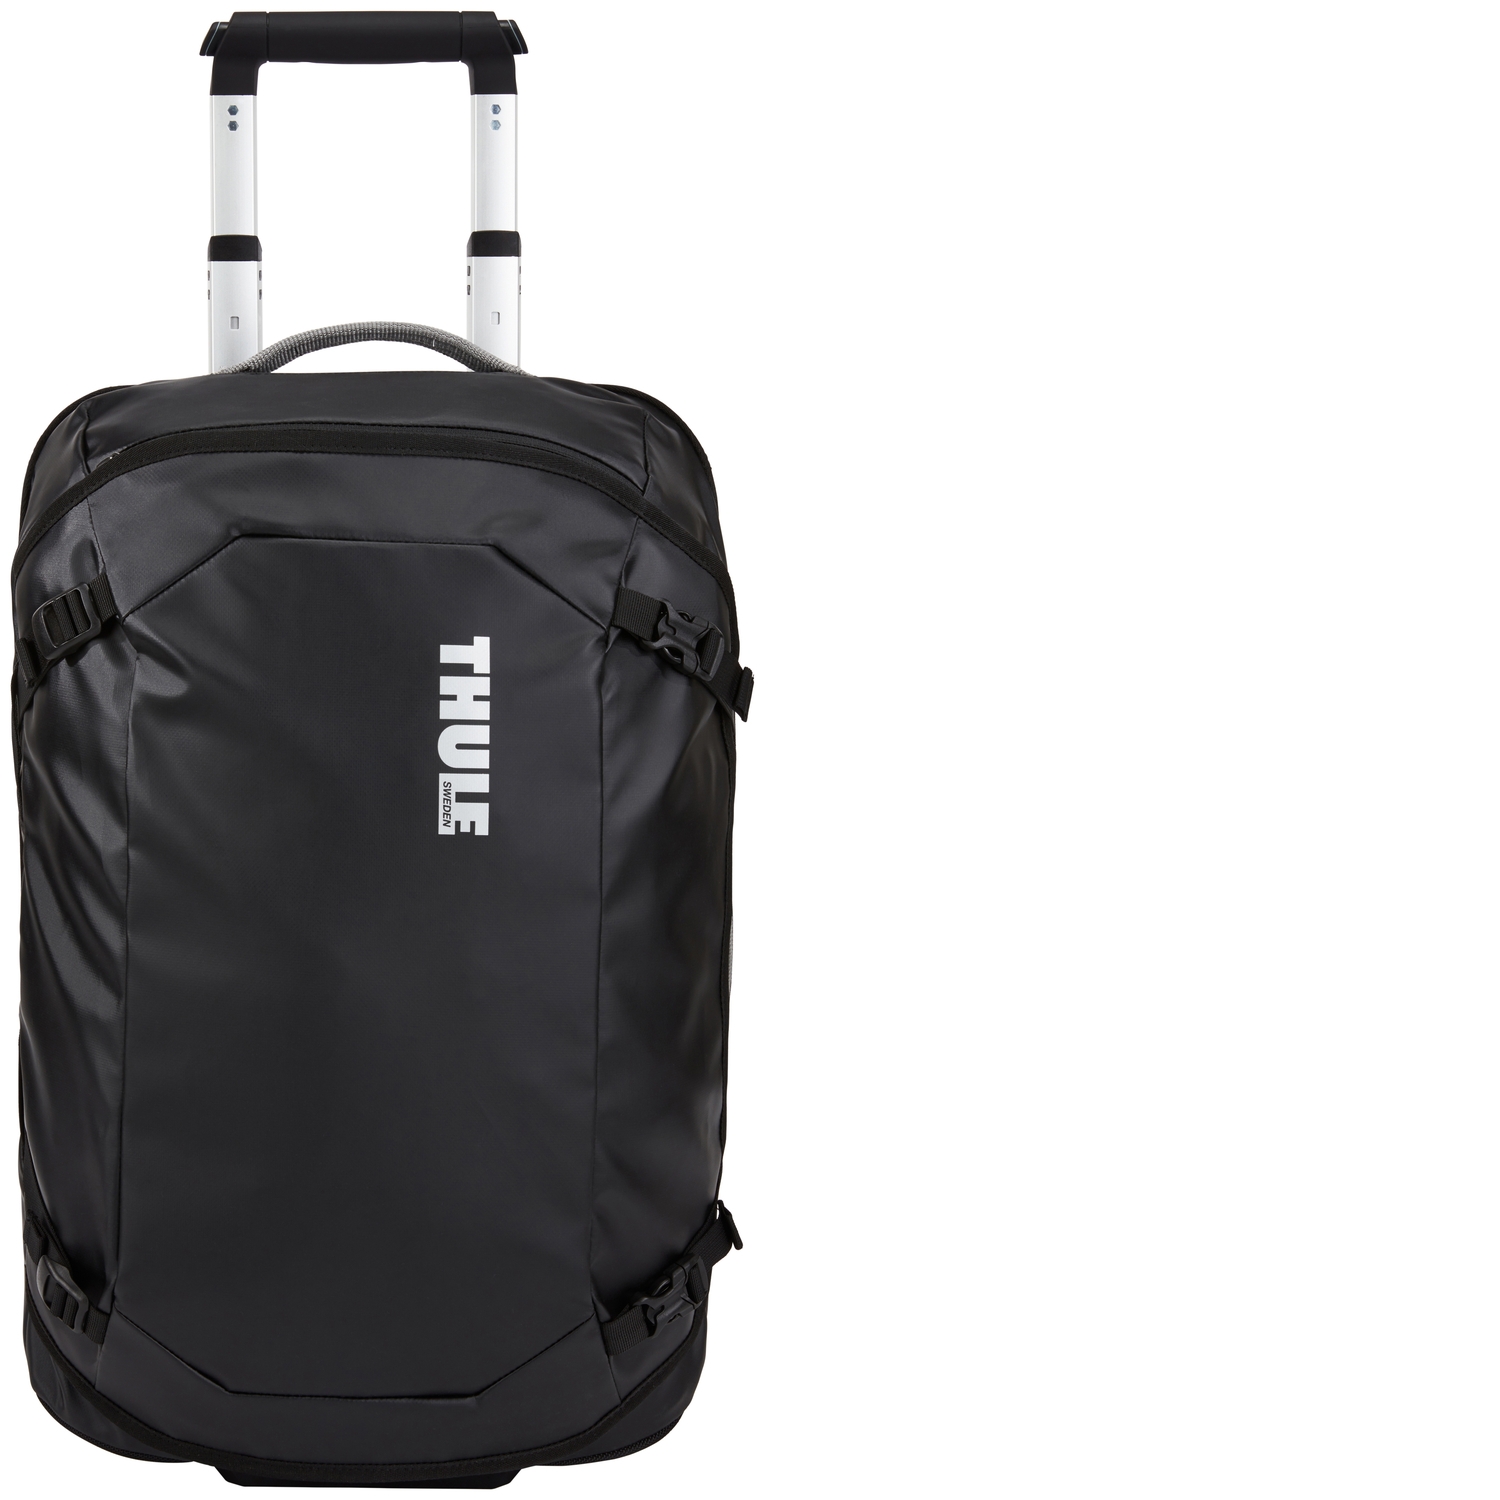 Thule Chasm Carry On - Black